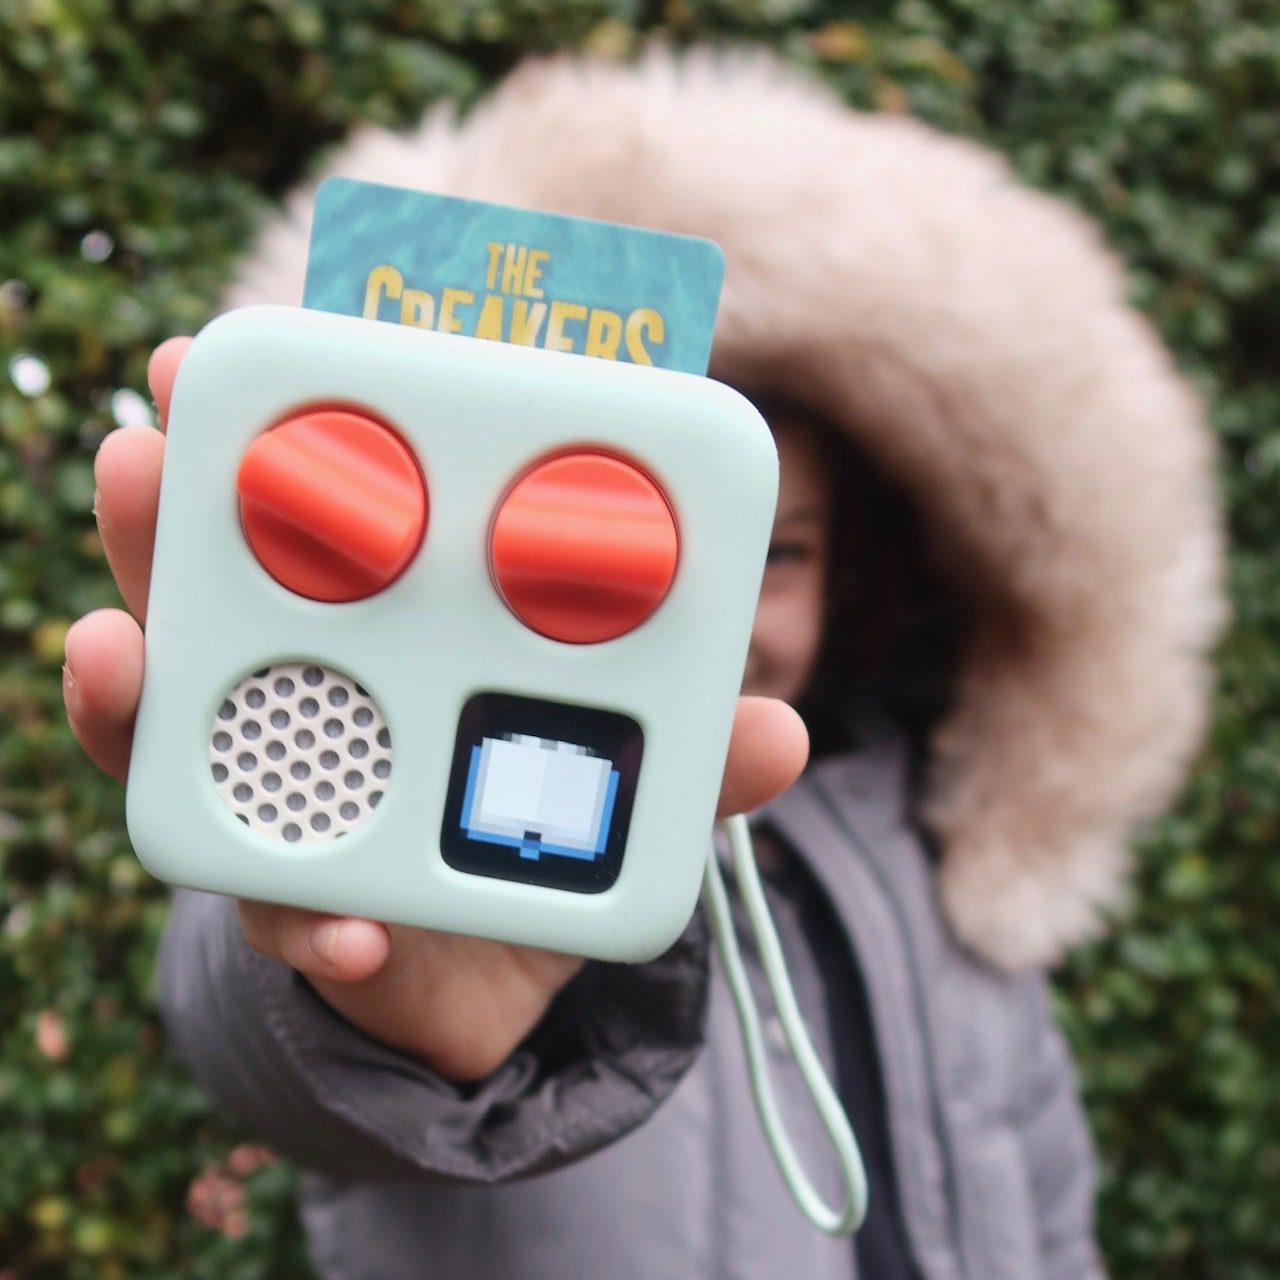 Yoto Player Review: A Cute Cube-Shaped Kids Speaker